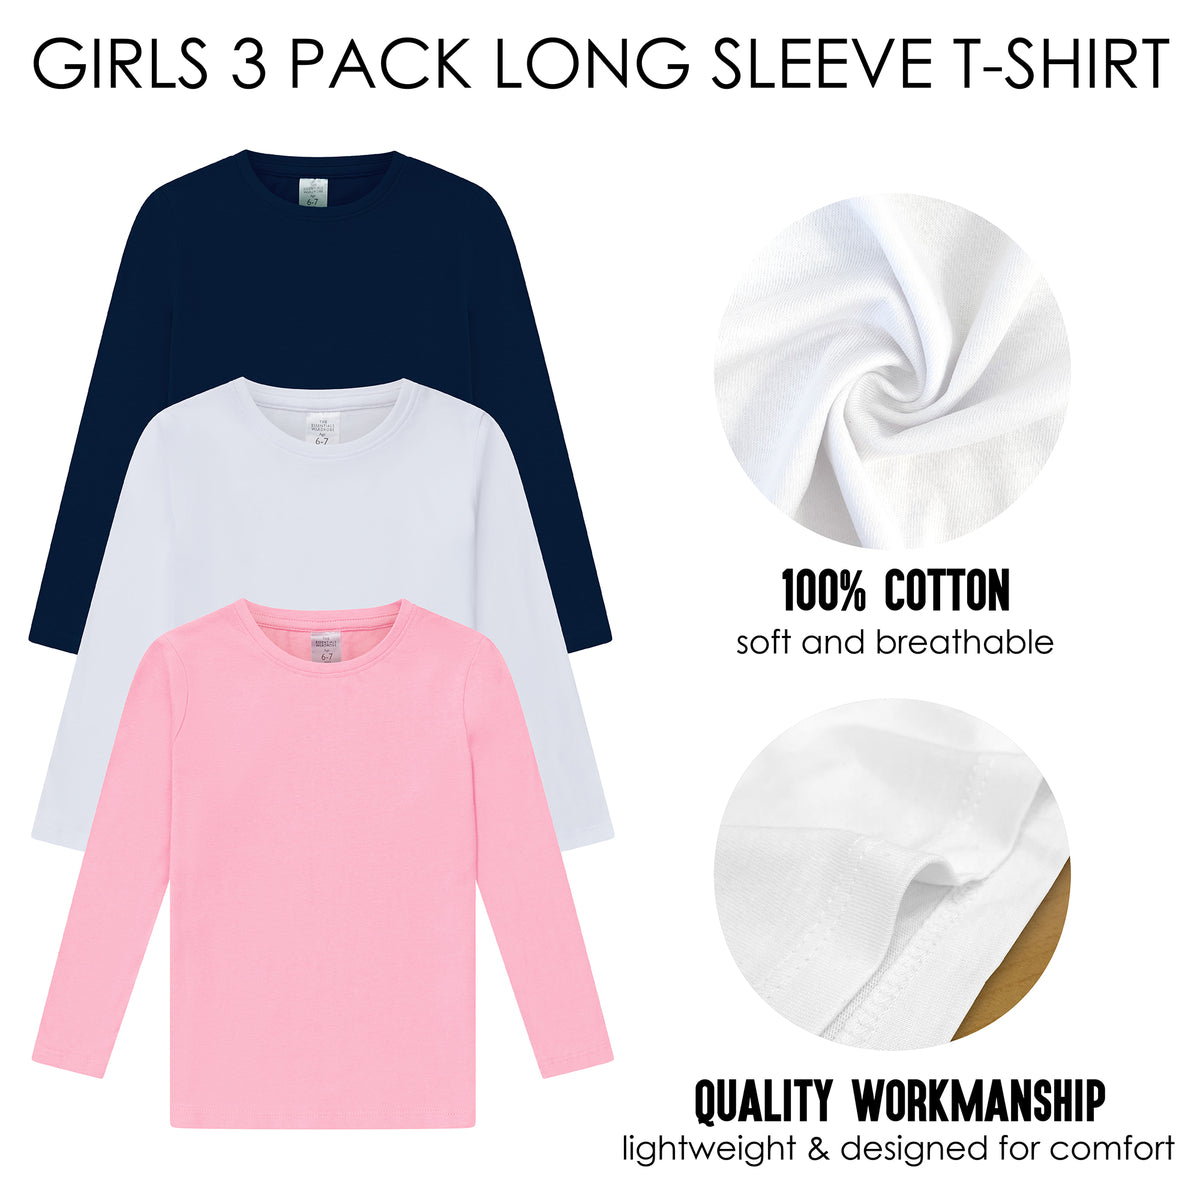 Girls 3 Pack LS T- Shirt Assorted 1 Younger